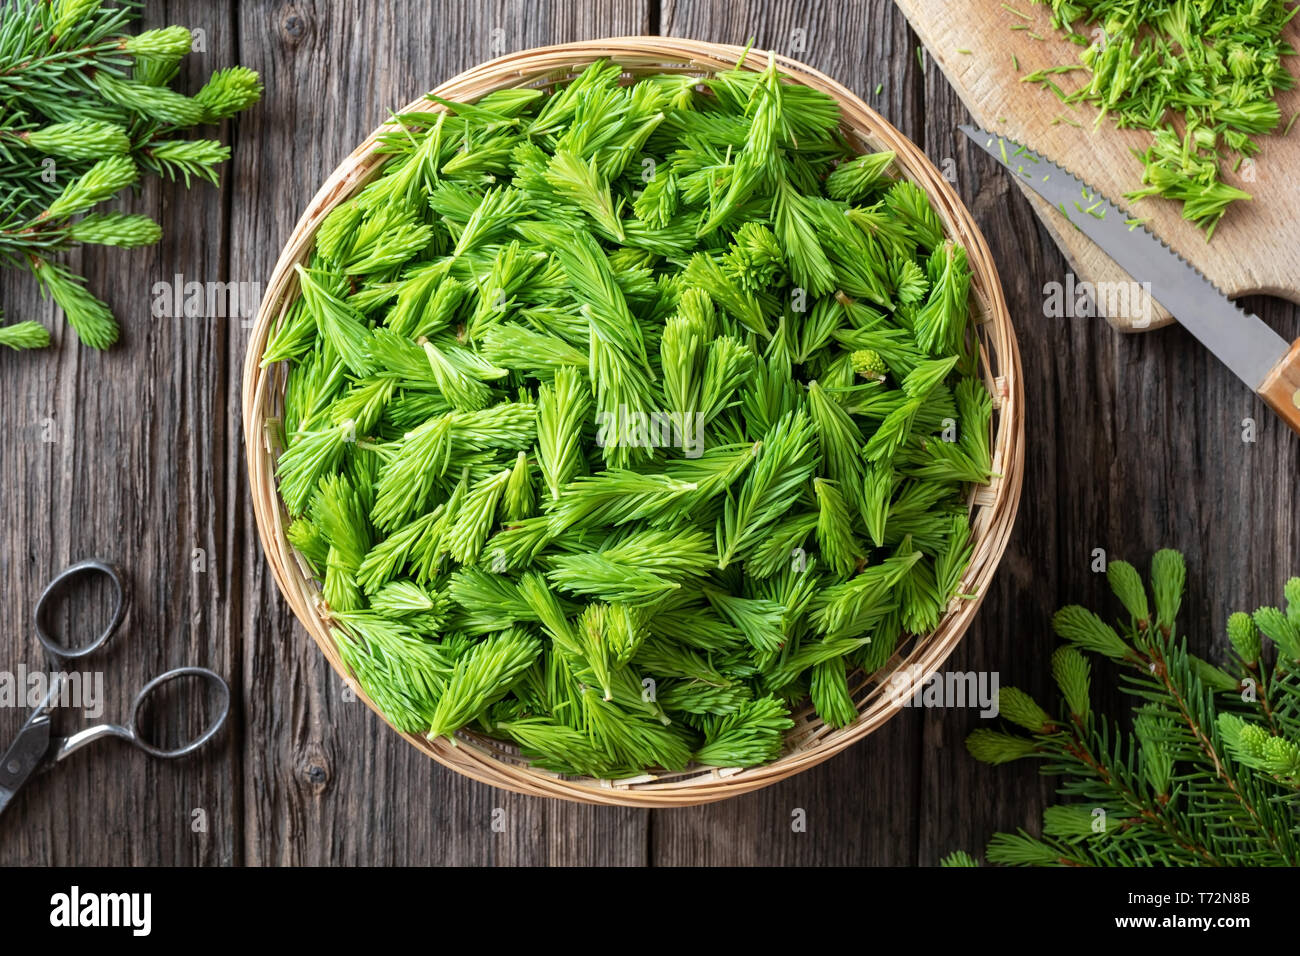 Young spruce tips collected to prepare homemade herbal syrup, top view Stock Photo